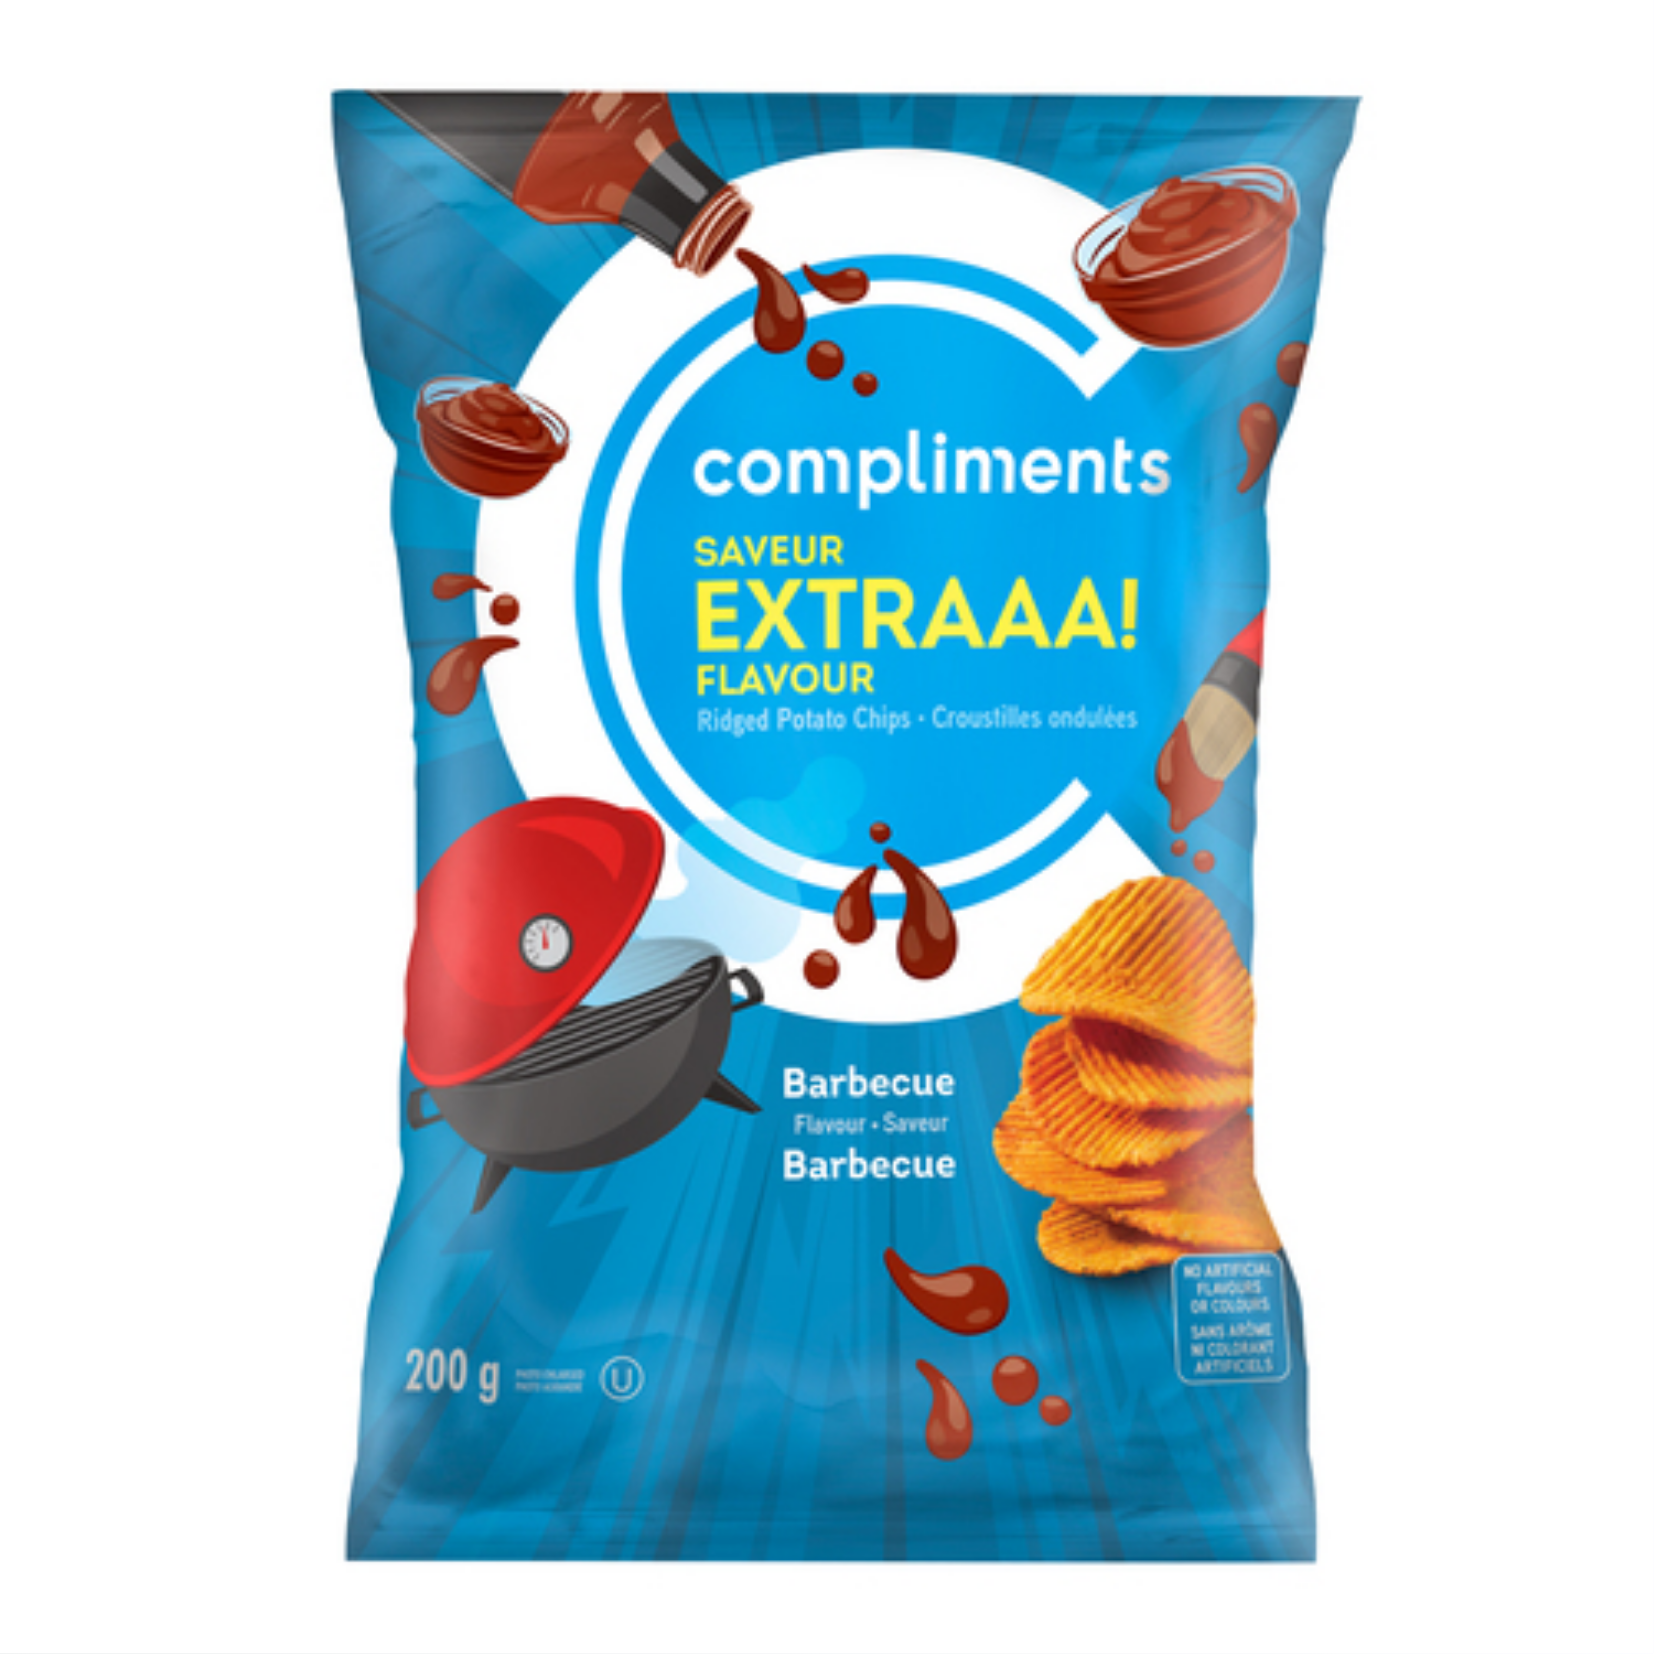 Compliments Extraaa! Flavor Ridged Barbecue Chips 200g